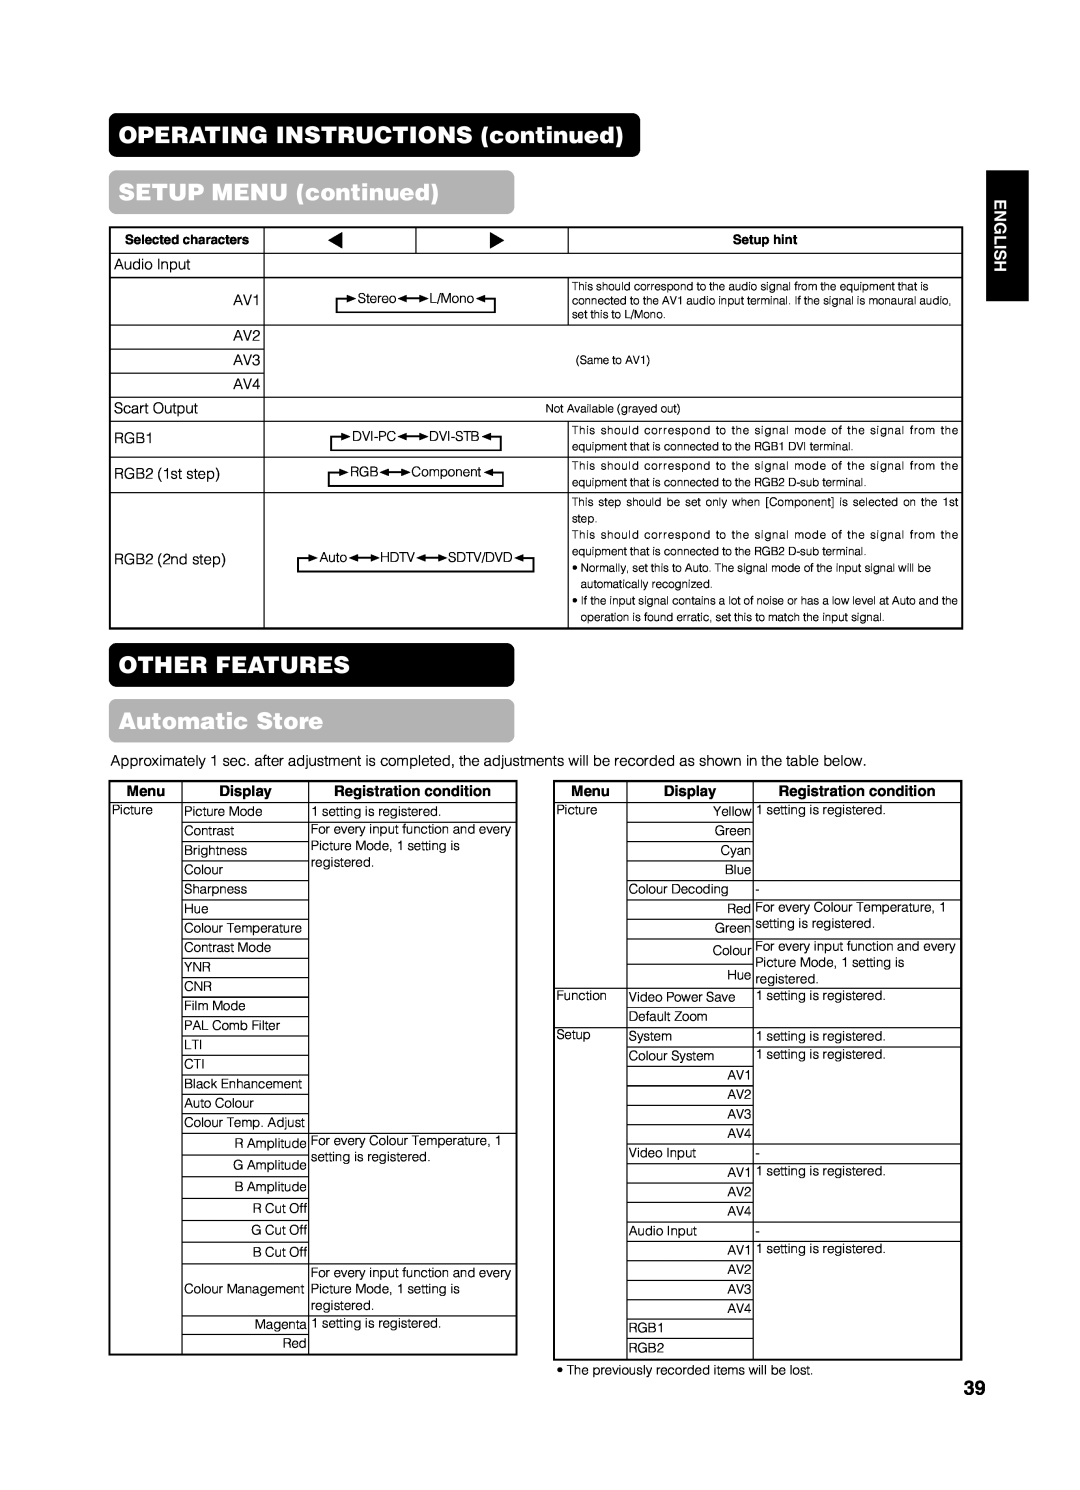 Yamaha PDM-4210E user manual OPERATING INSTRUCTIONS continued SETUP MENU continued, OTHER FEATURES Automatic Store, English 